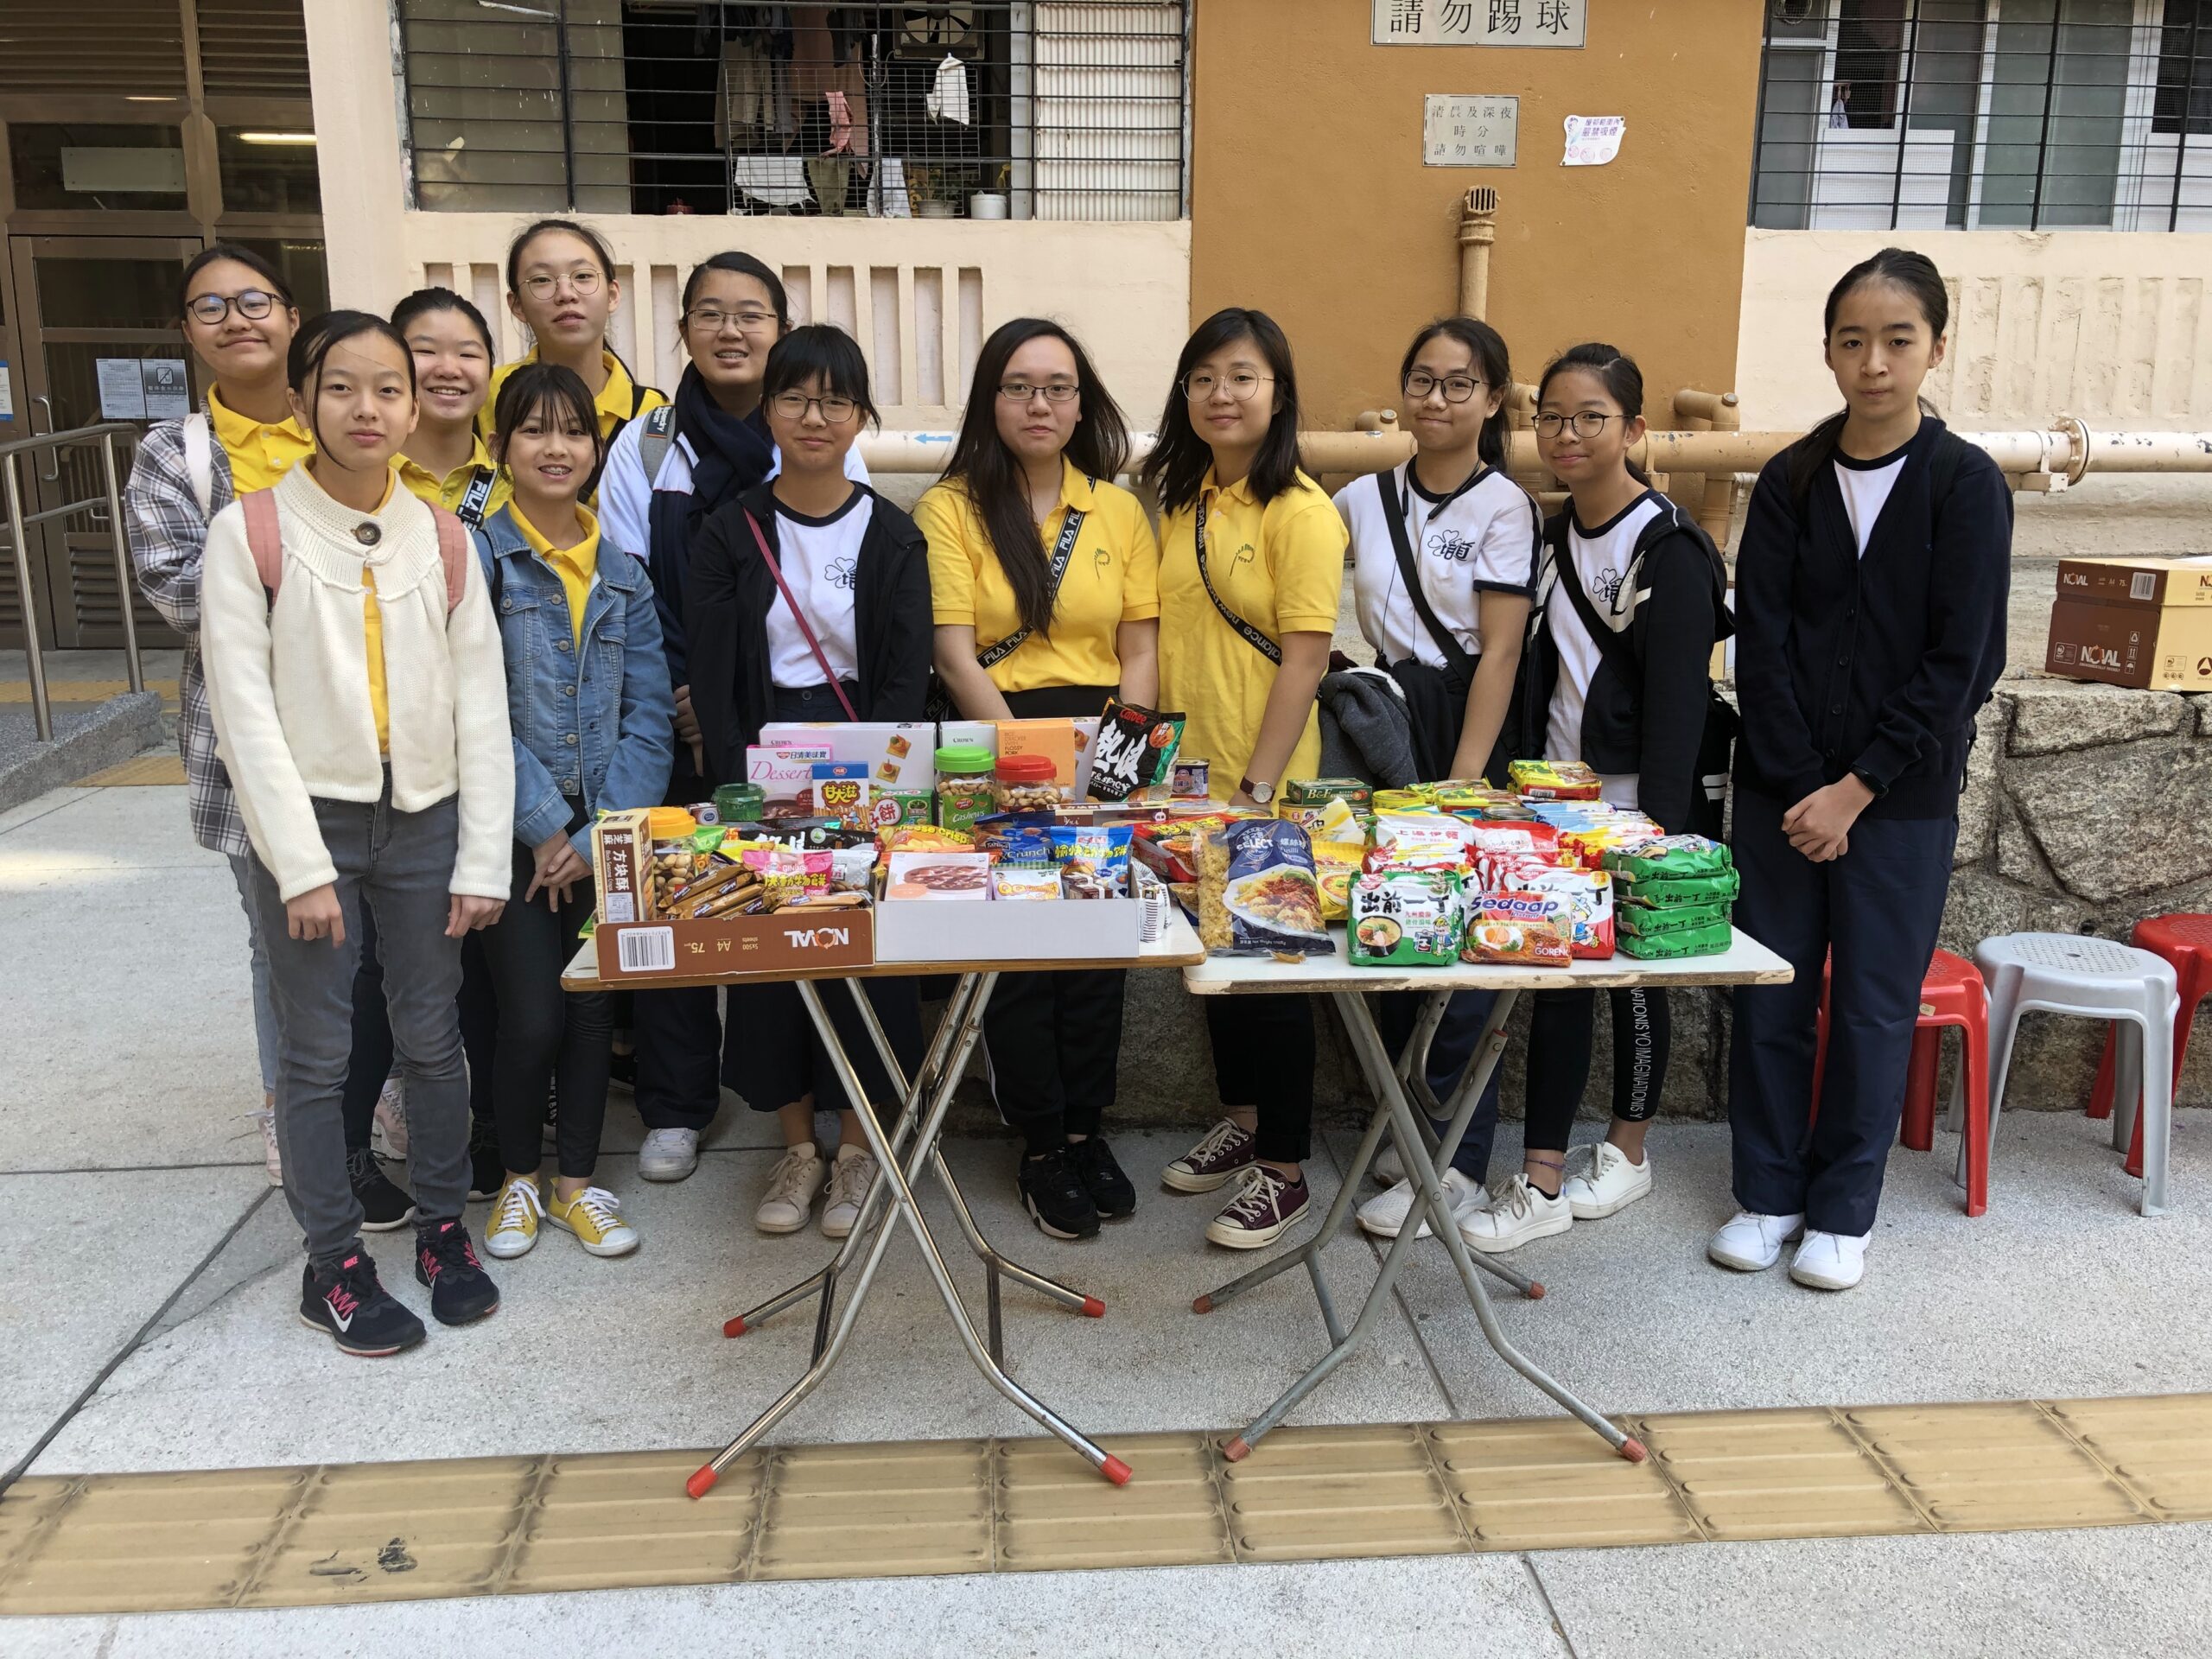 Students help distributing food collected to those in need